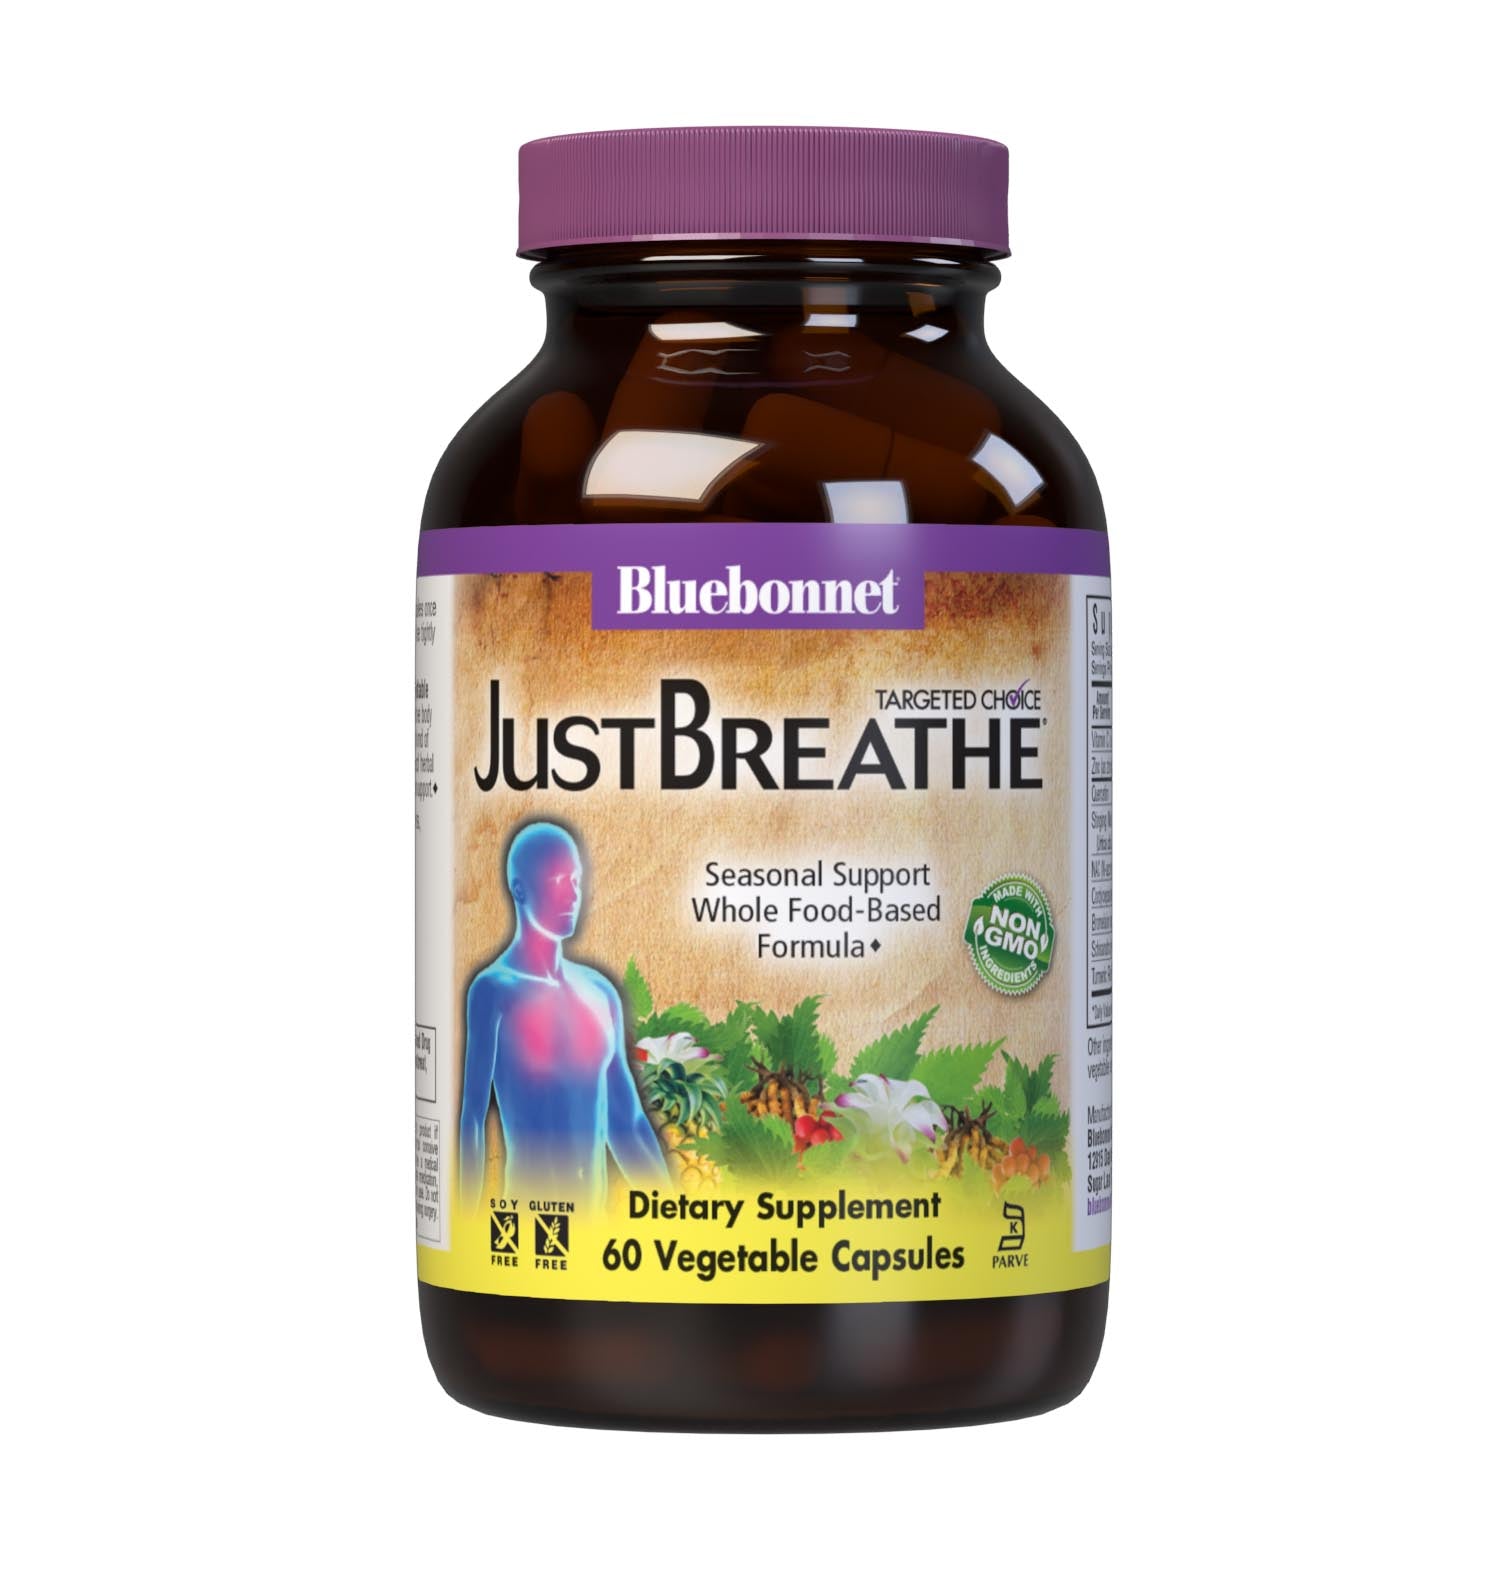 Bluebonnet’s Targeted Choice Just Breathe 60 Vegetable Capsules are specially formulated to support the body through seasonal changes and encourage free and clear breathing by helping to open nasal, sinus, and bronchial passages with a unique blend of immune-protective nutrients and sustainably sourced herbal extracts. #size_60 count